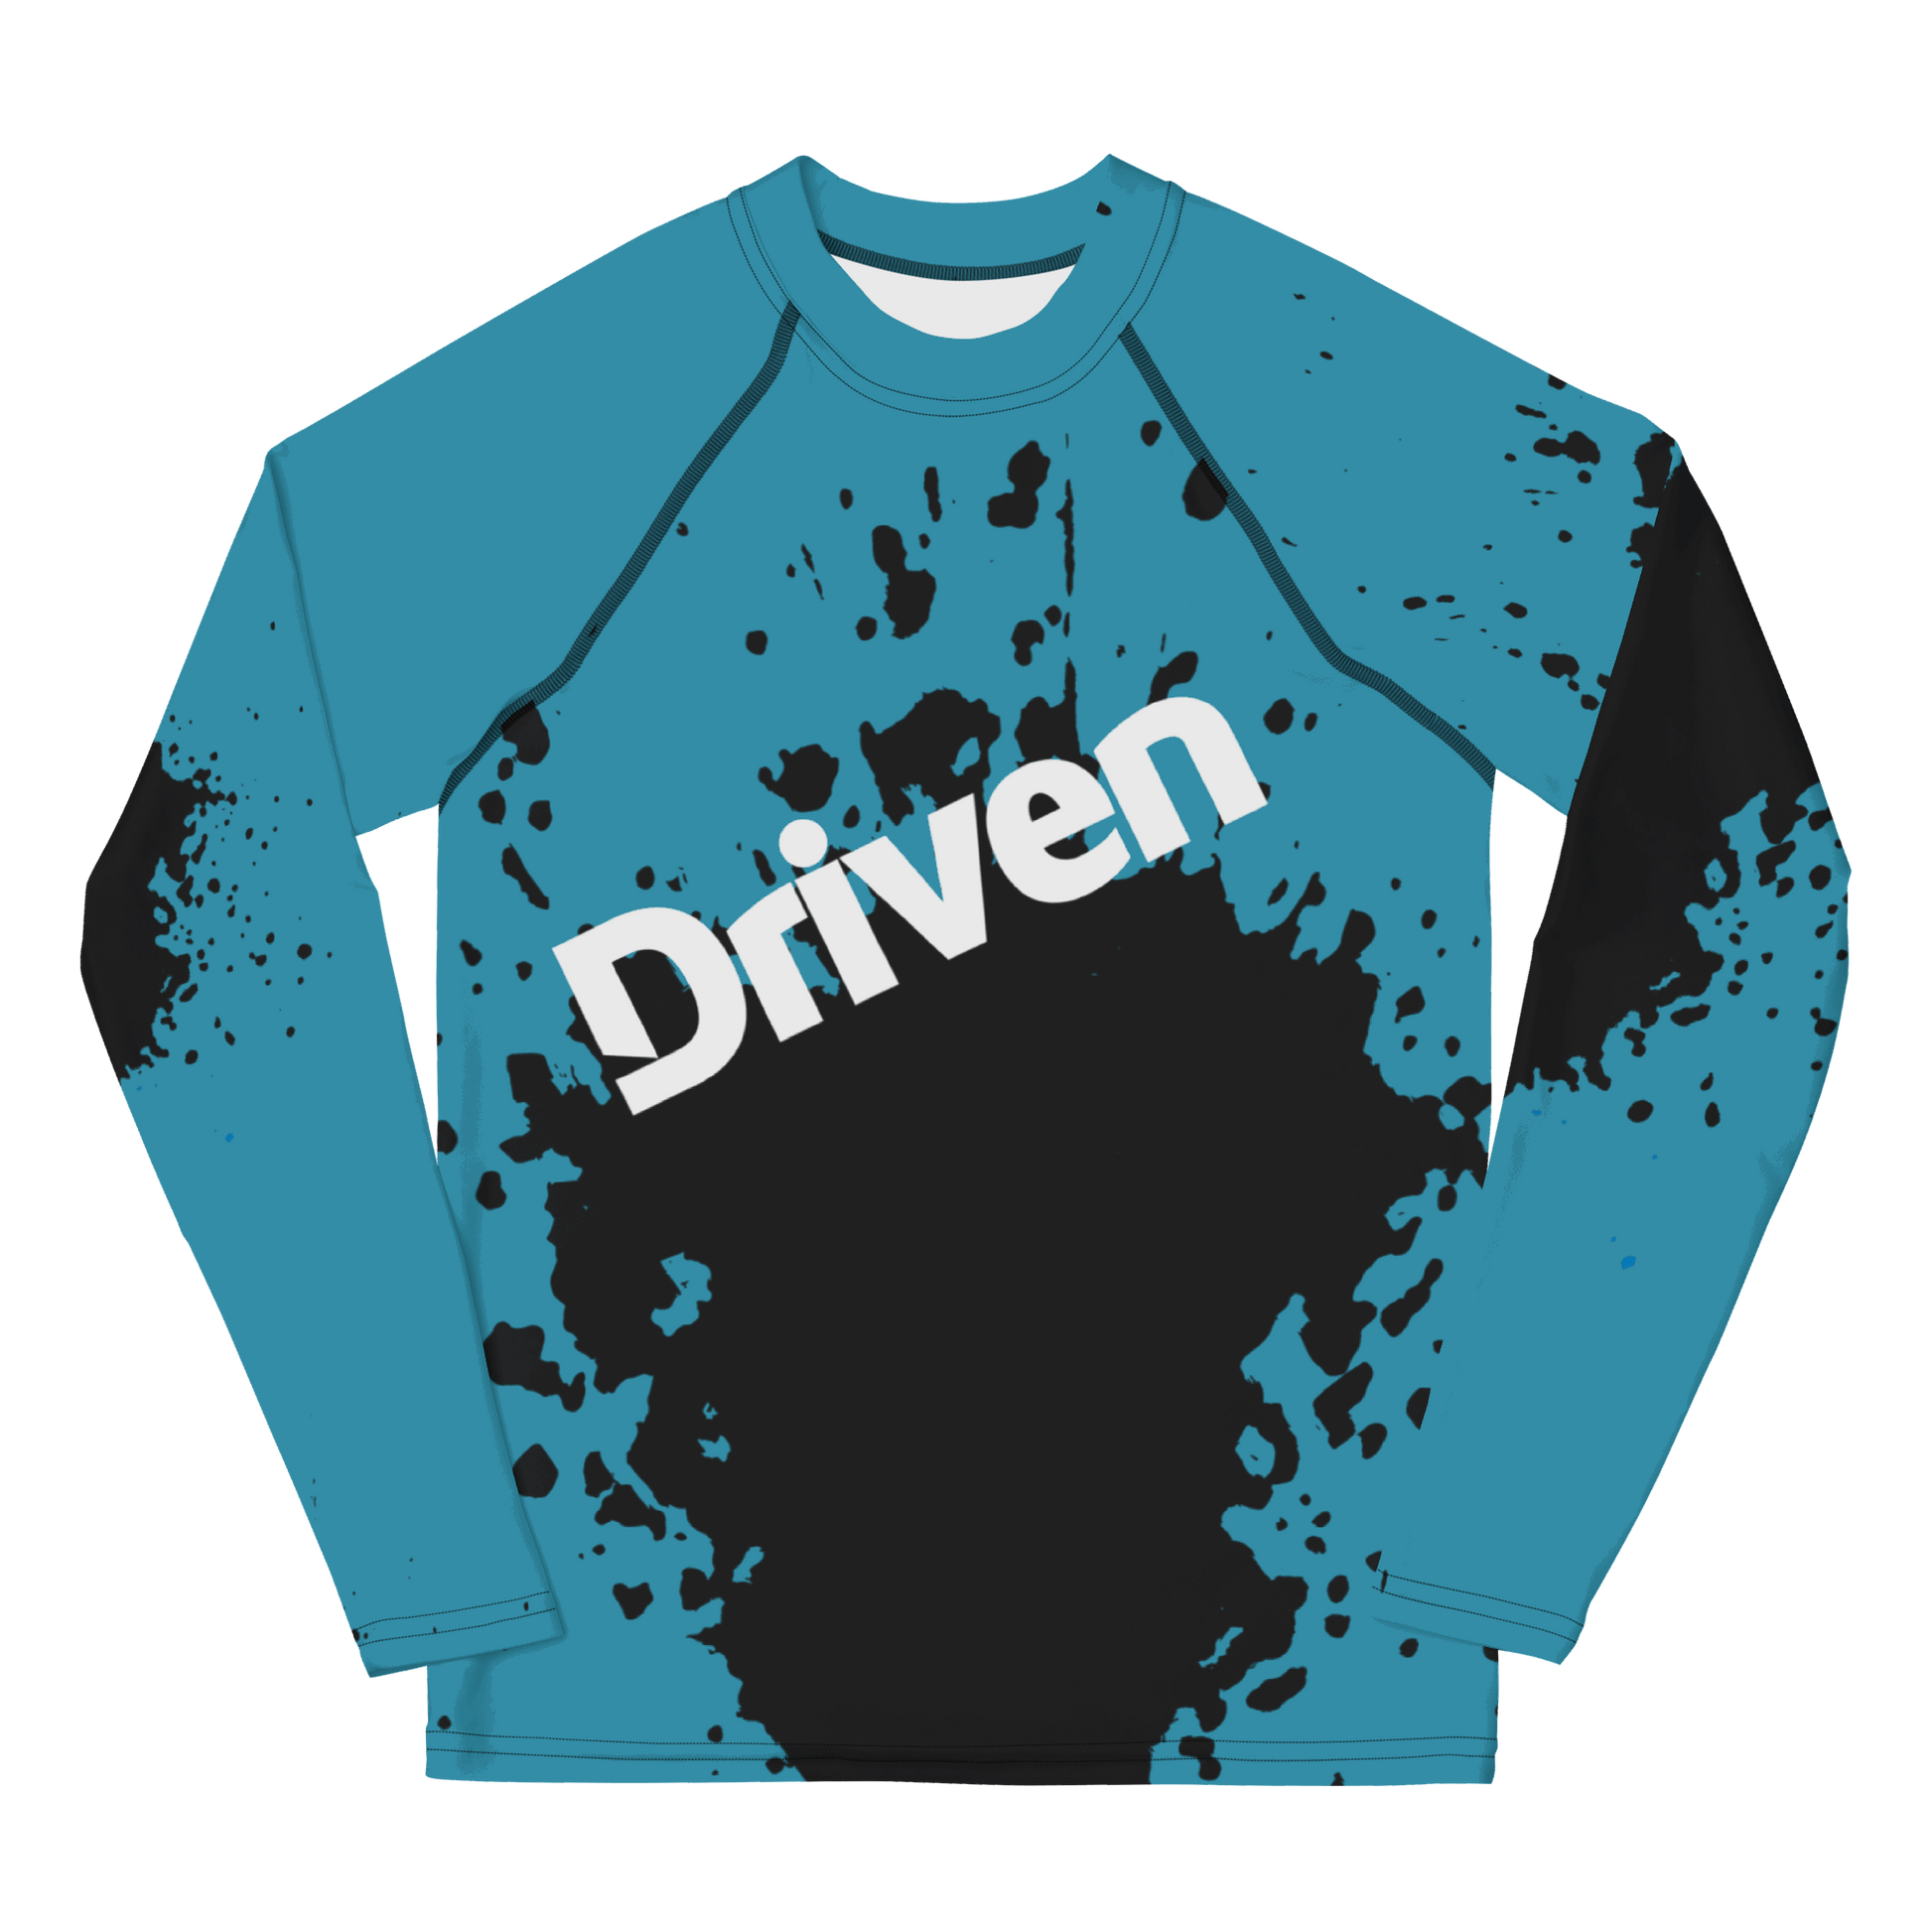 DRIVEN - Karting Underwear - Top - Youth Size